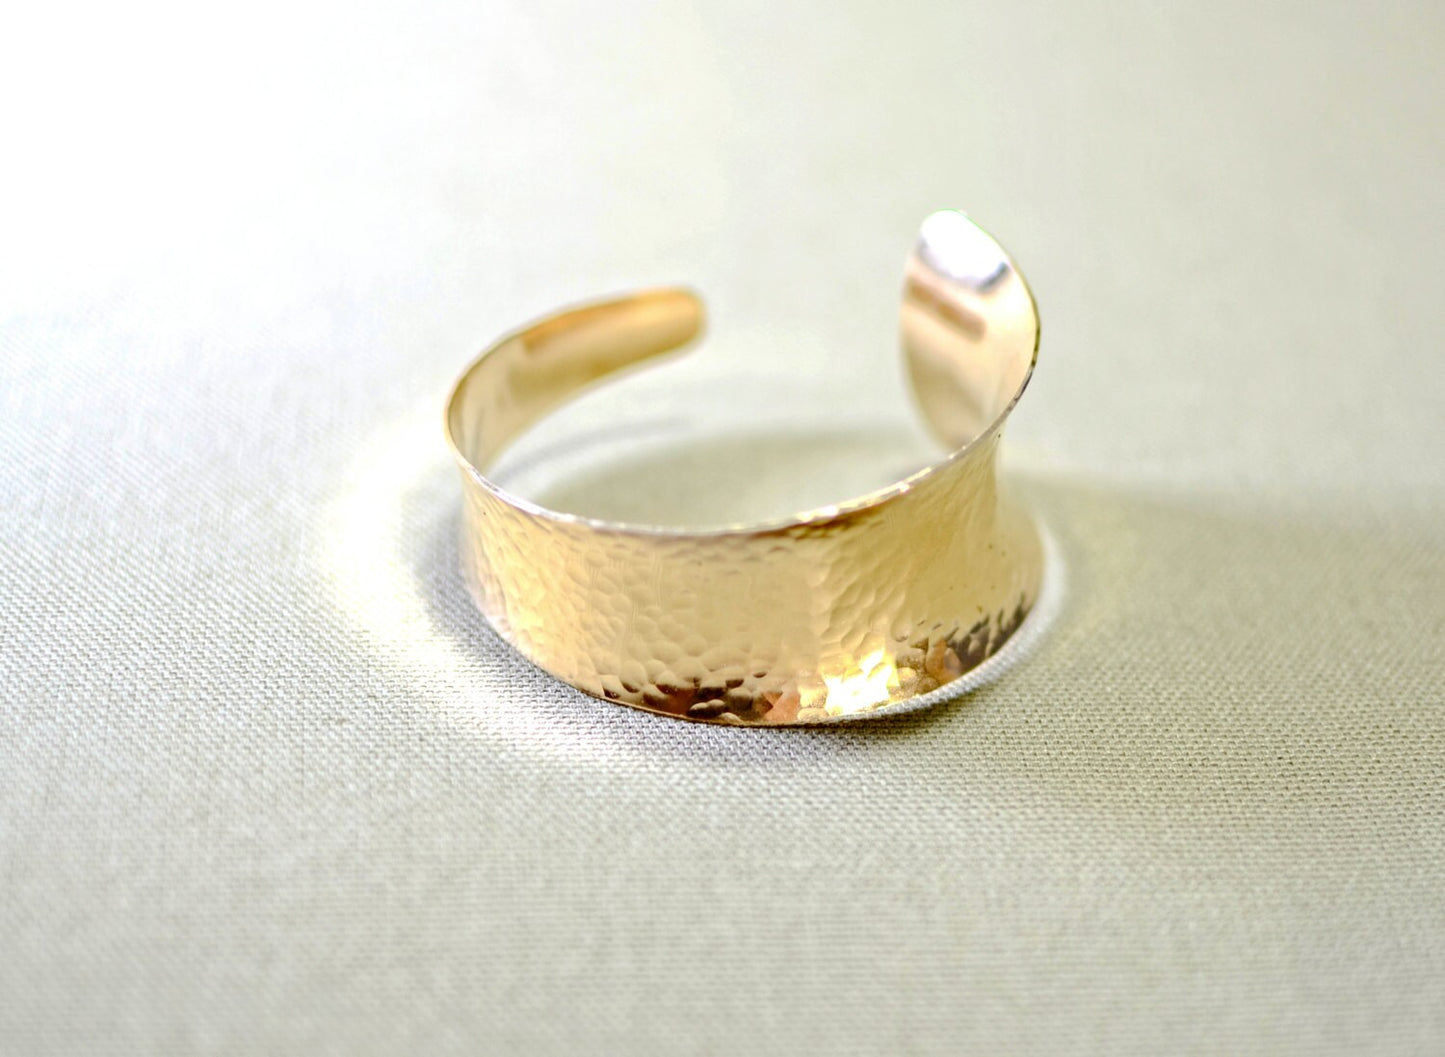 Hammered Bronze and Anticlastic Statement Cuff Bracelet